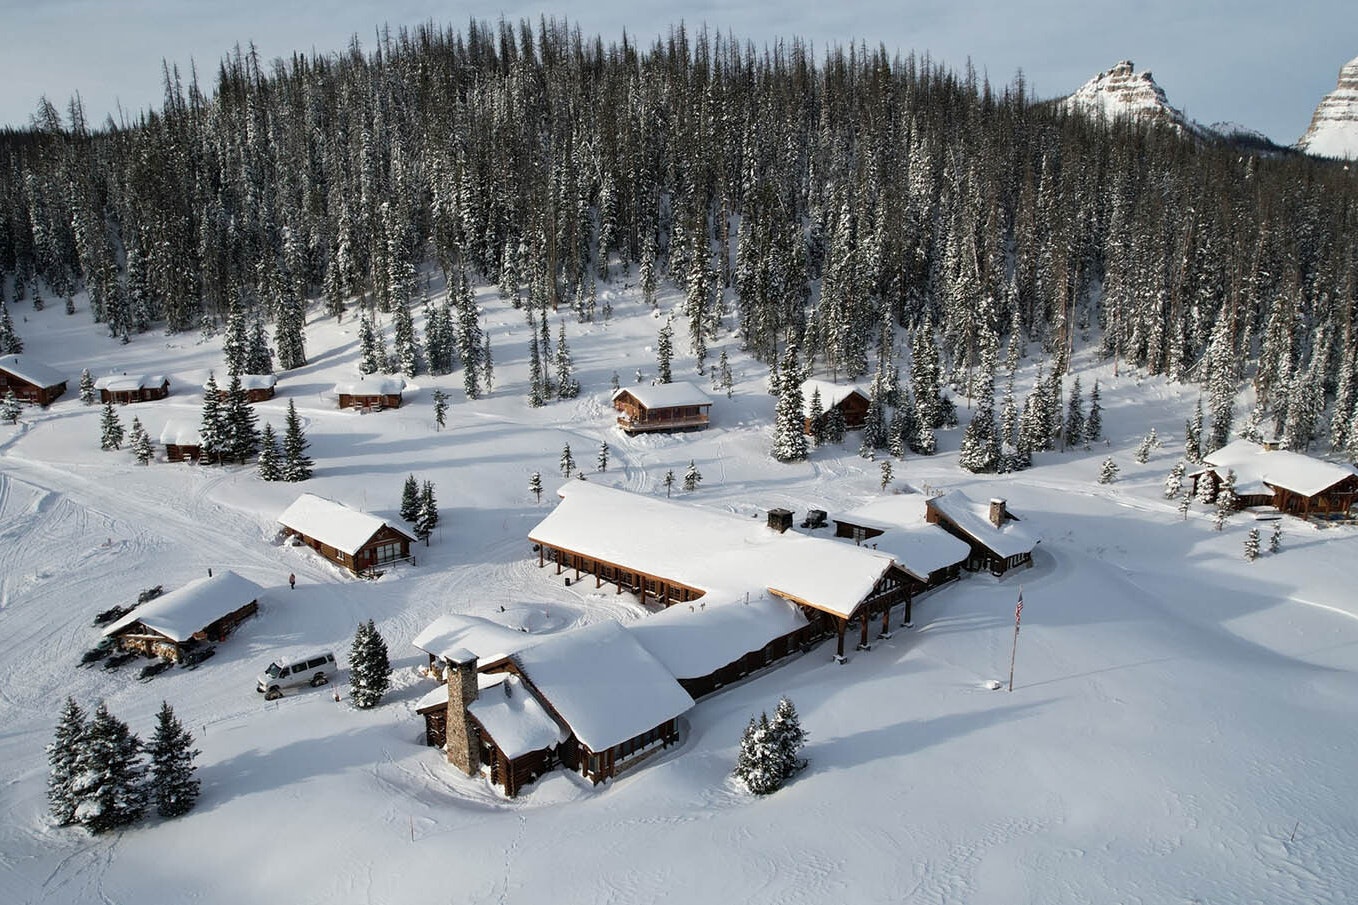 During Wyoming's legendary winters, Brooks Lake Lodge is a natural playground. But the only way to get there is in a snowcat or on a snowmobile.